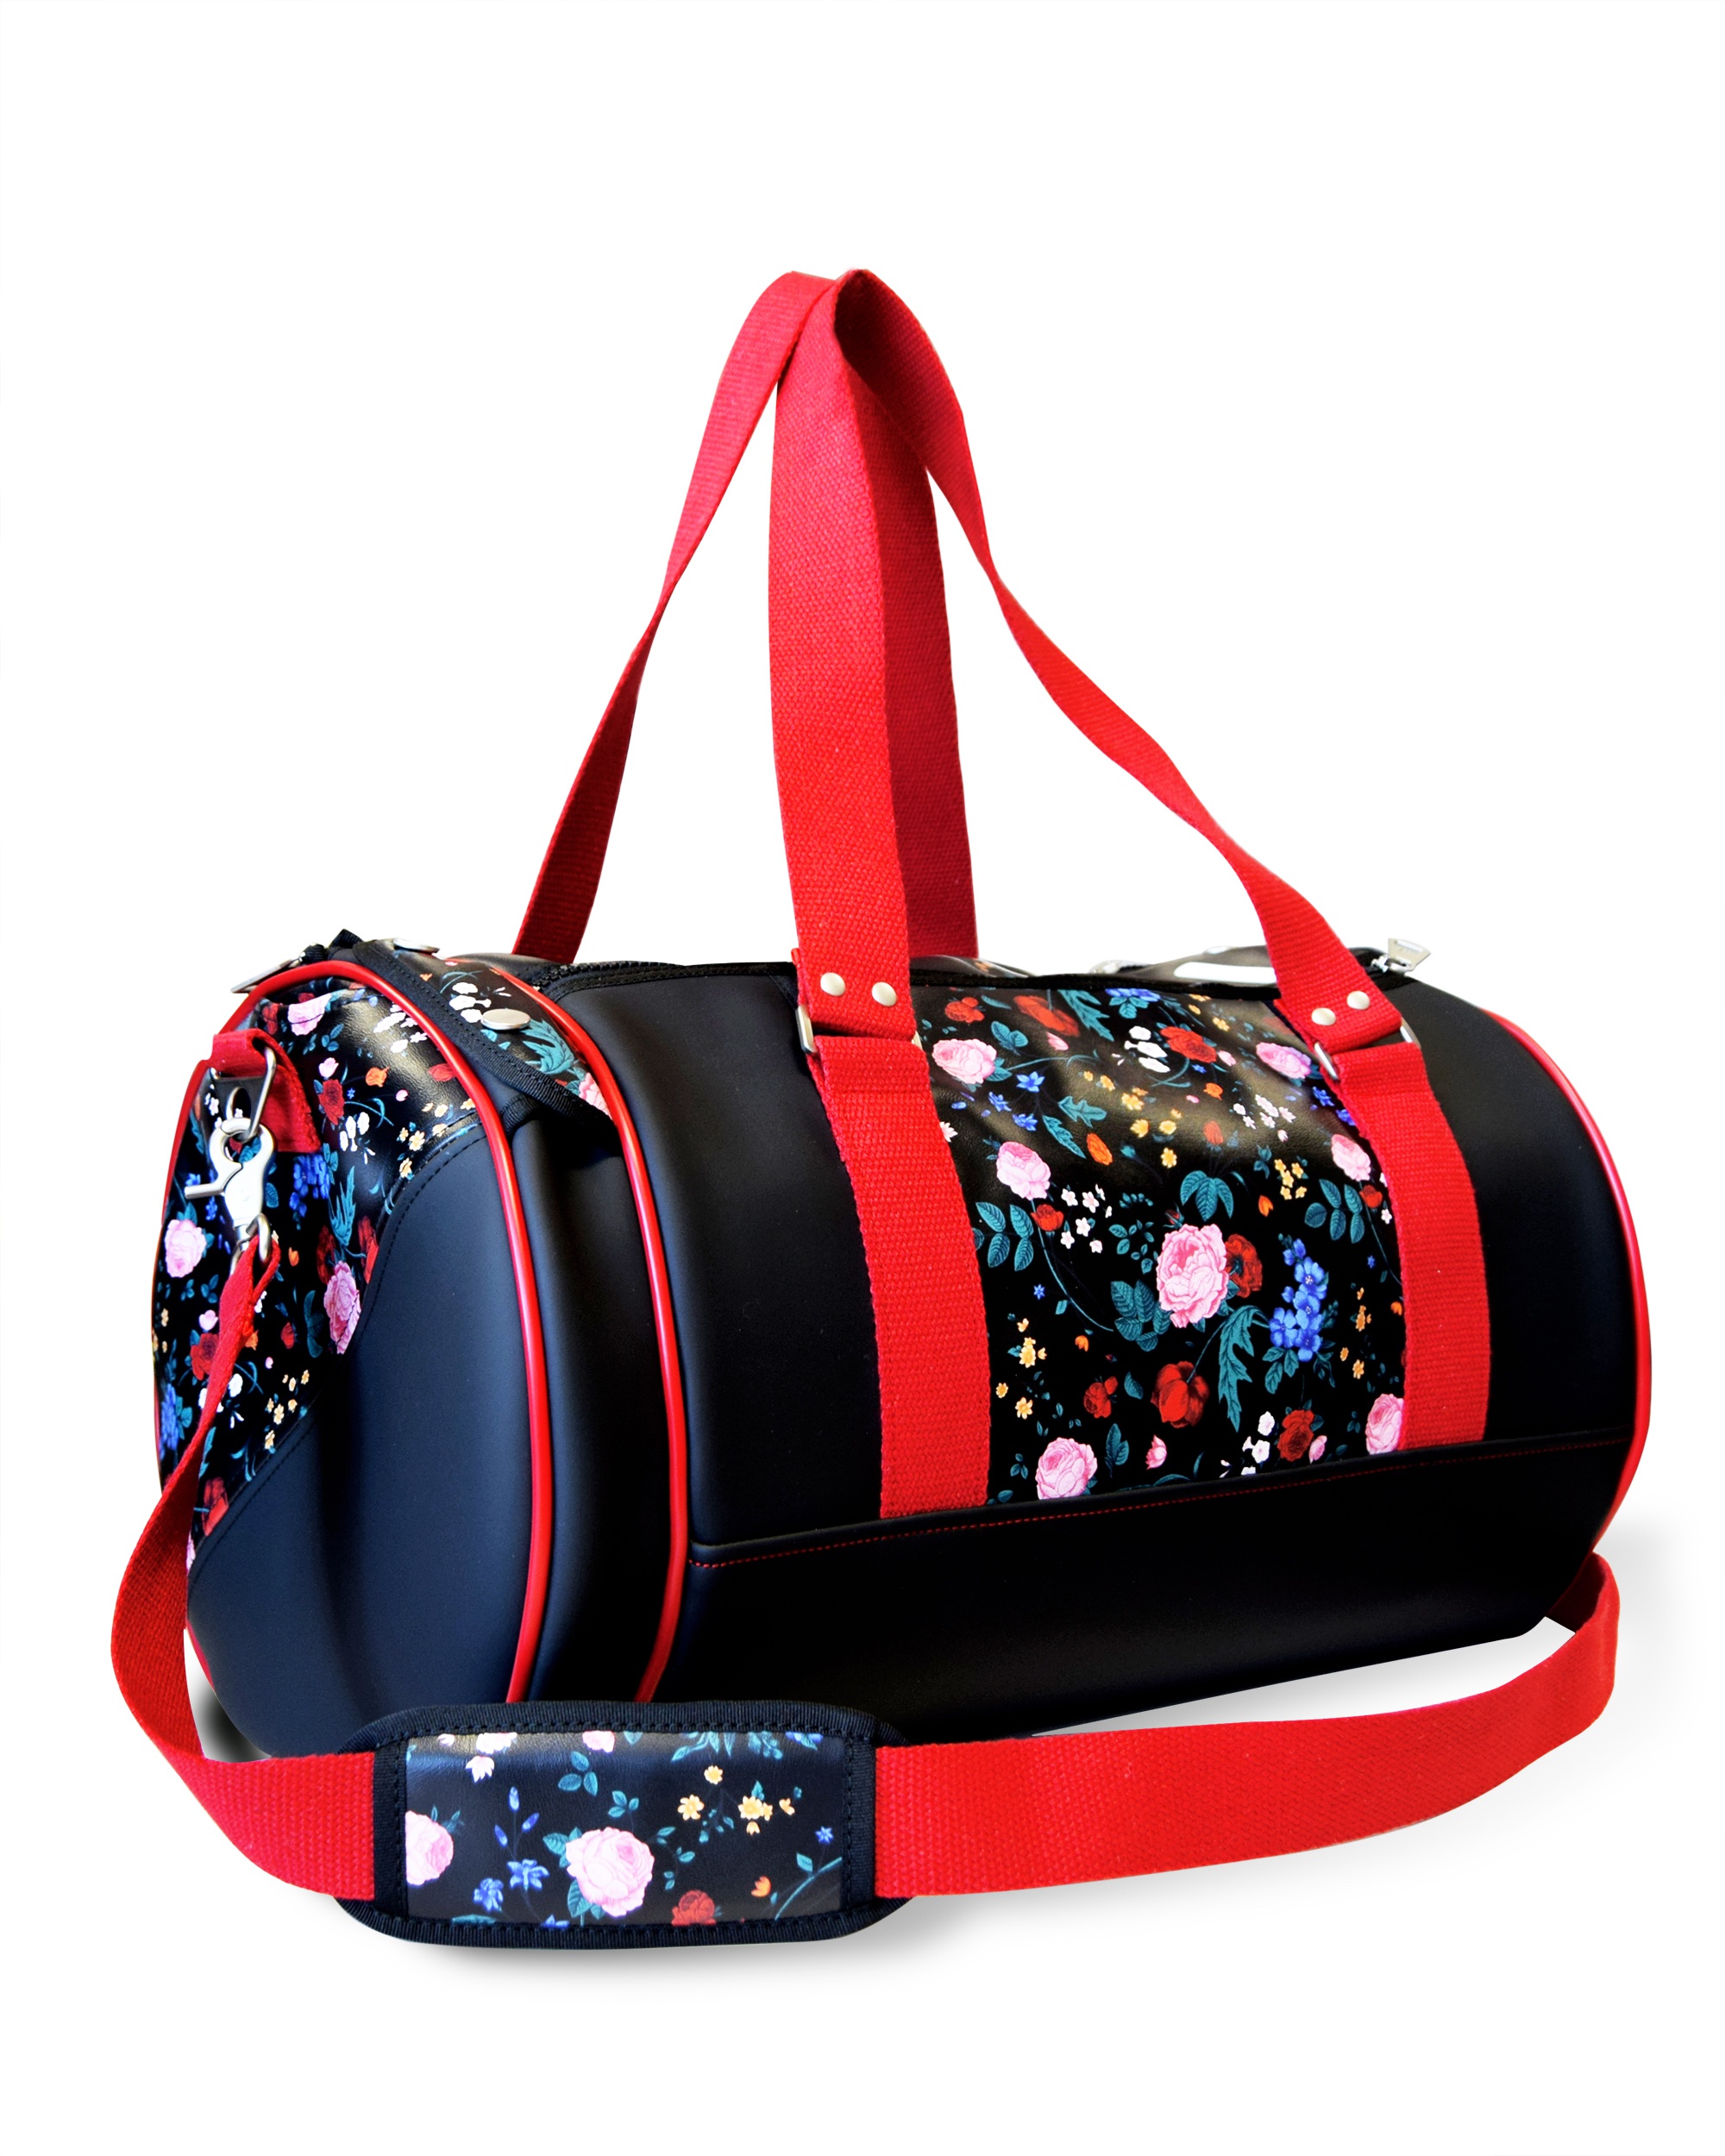 SPORT DUFFLE BAG FLORAL PRINT Fitness bag with floral pattern.